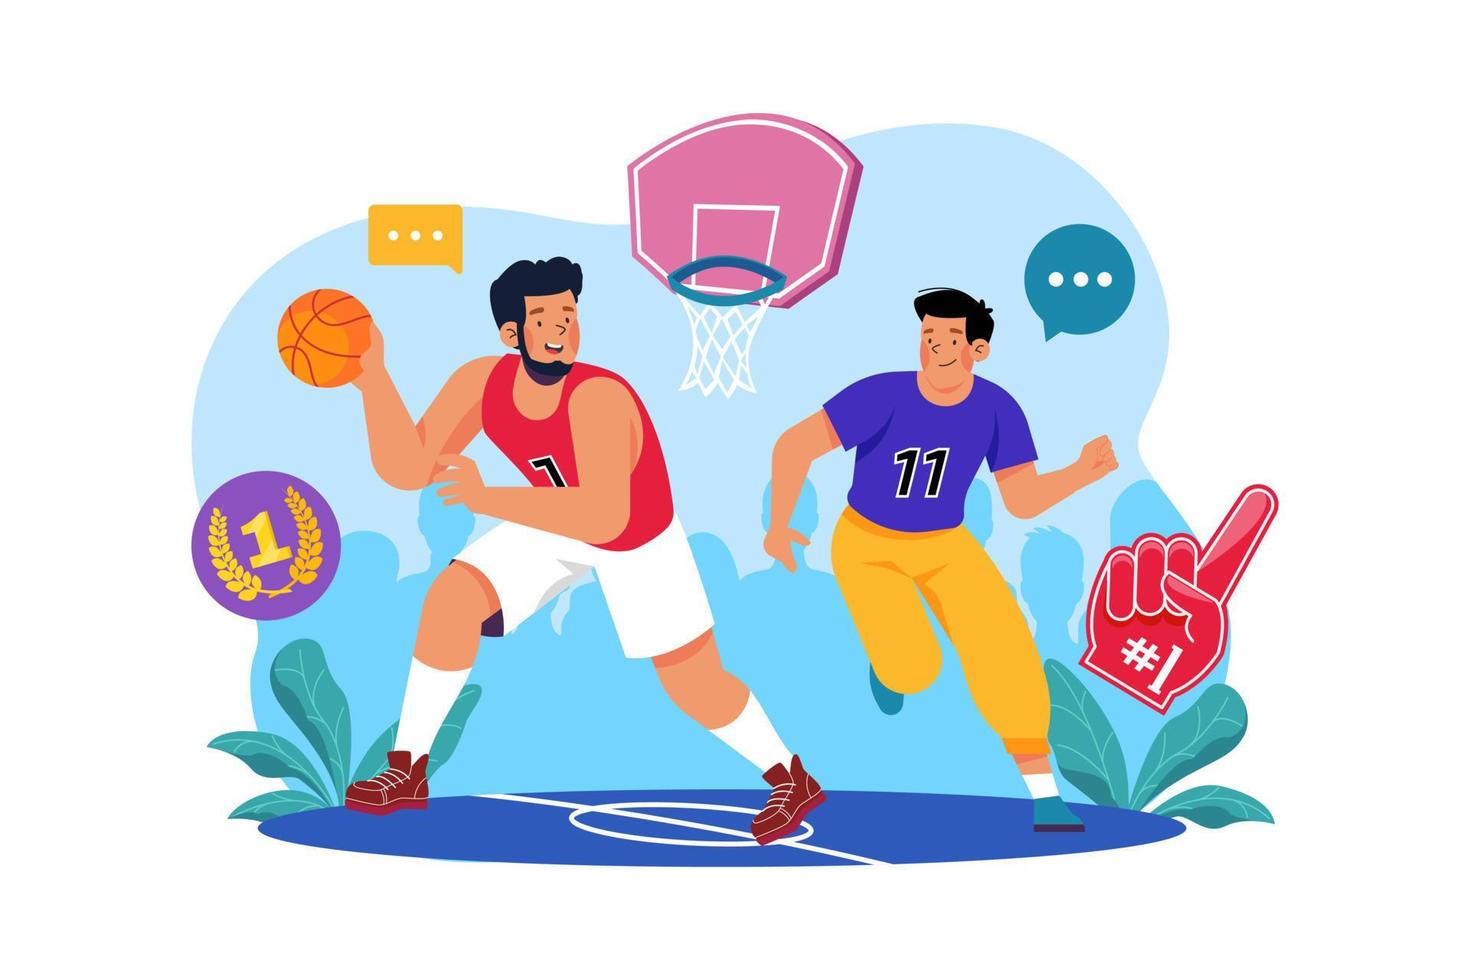 Basketball players on the court Illustration concept on white background vector